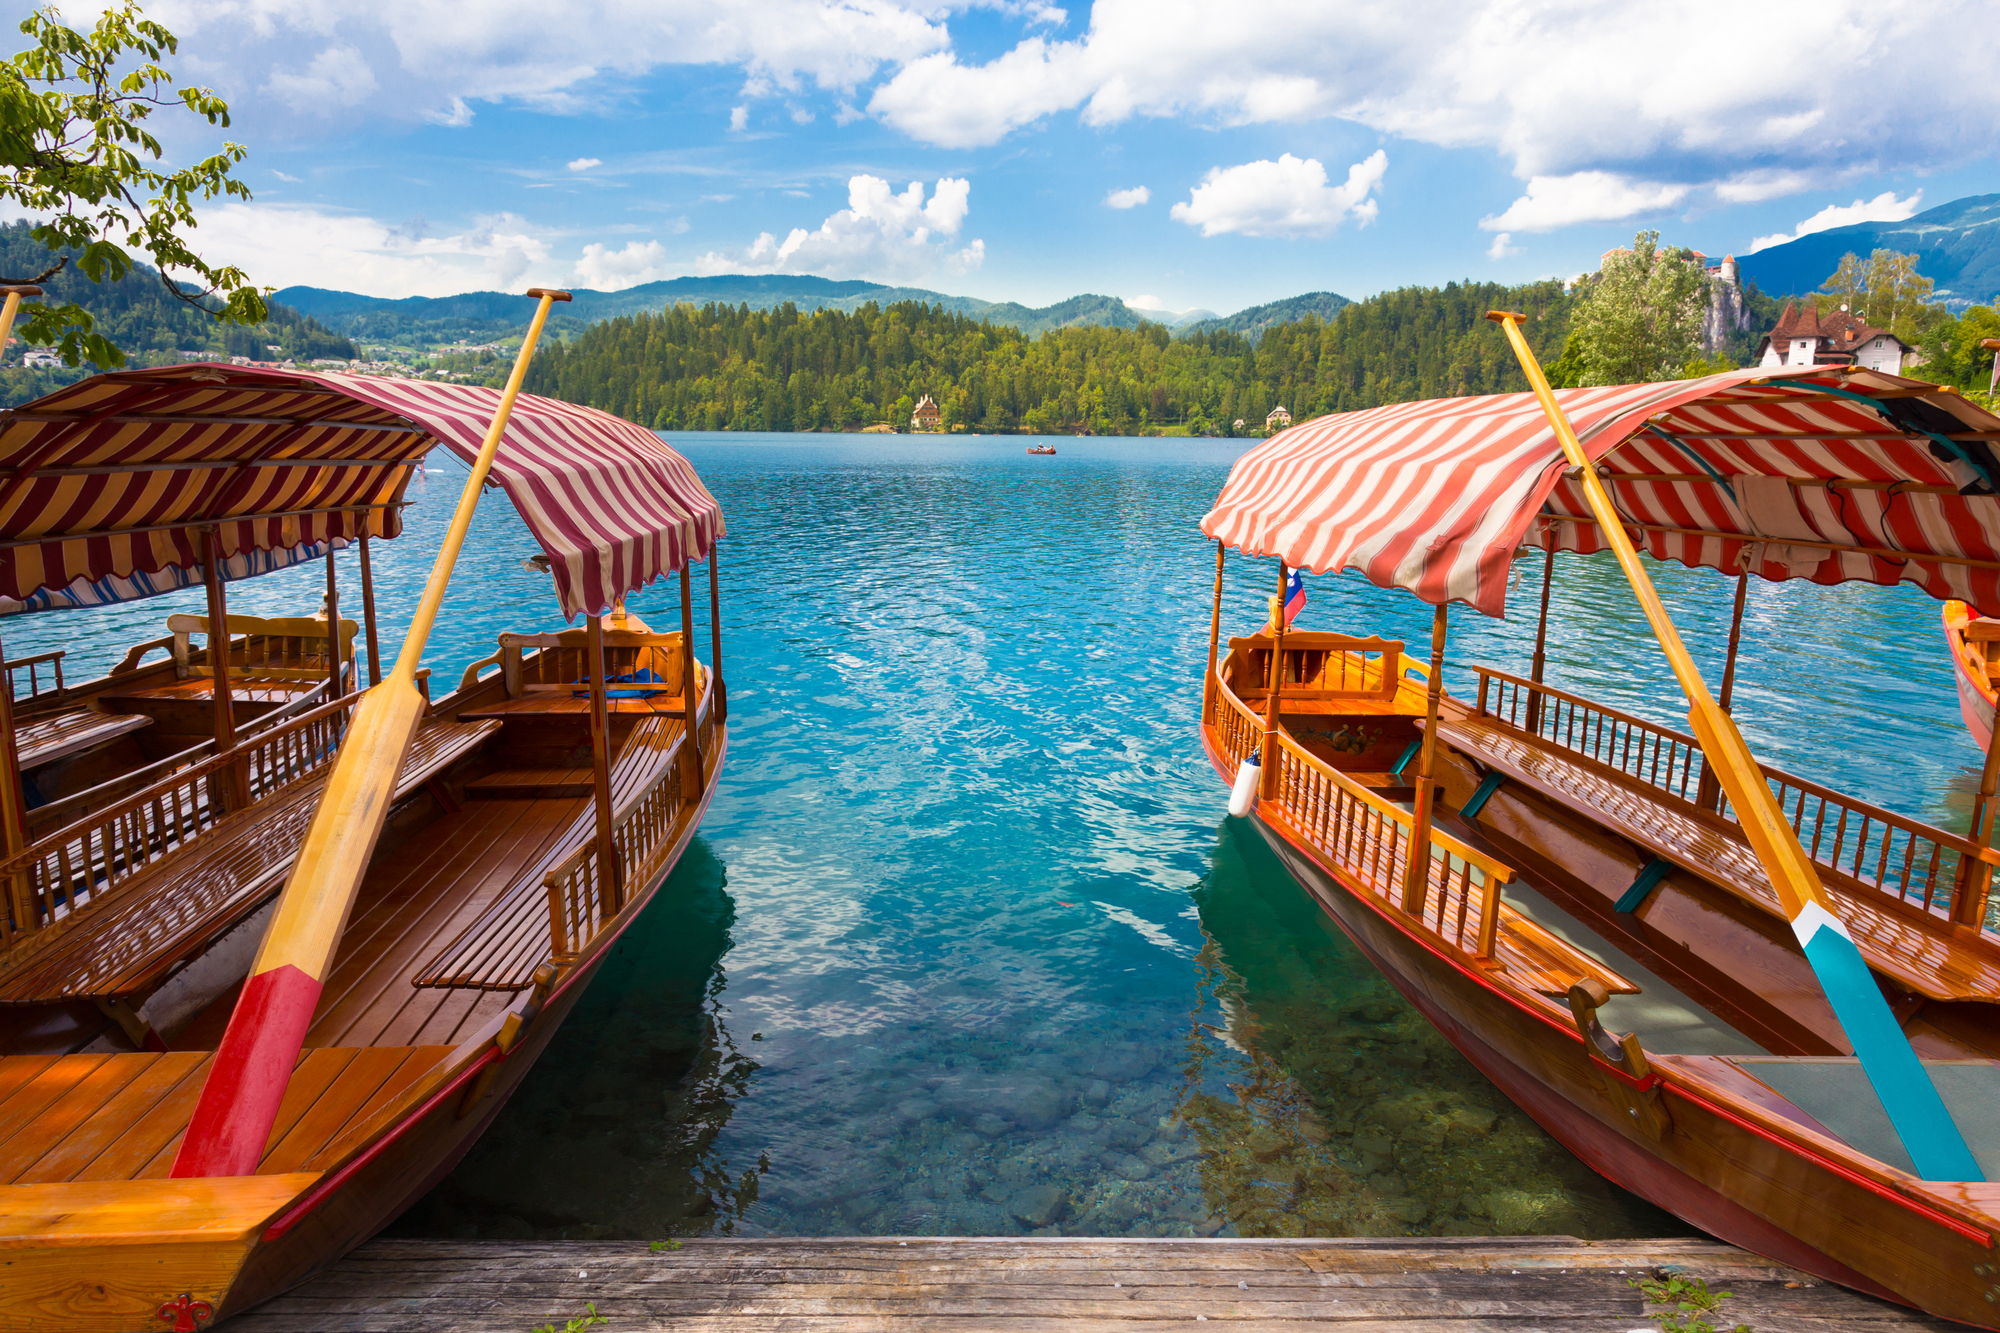 Traditional wooden boats on picture perfect lake Bled, Slovenia.